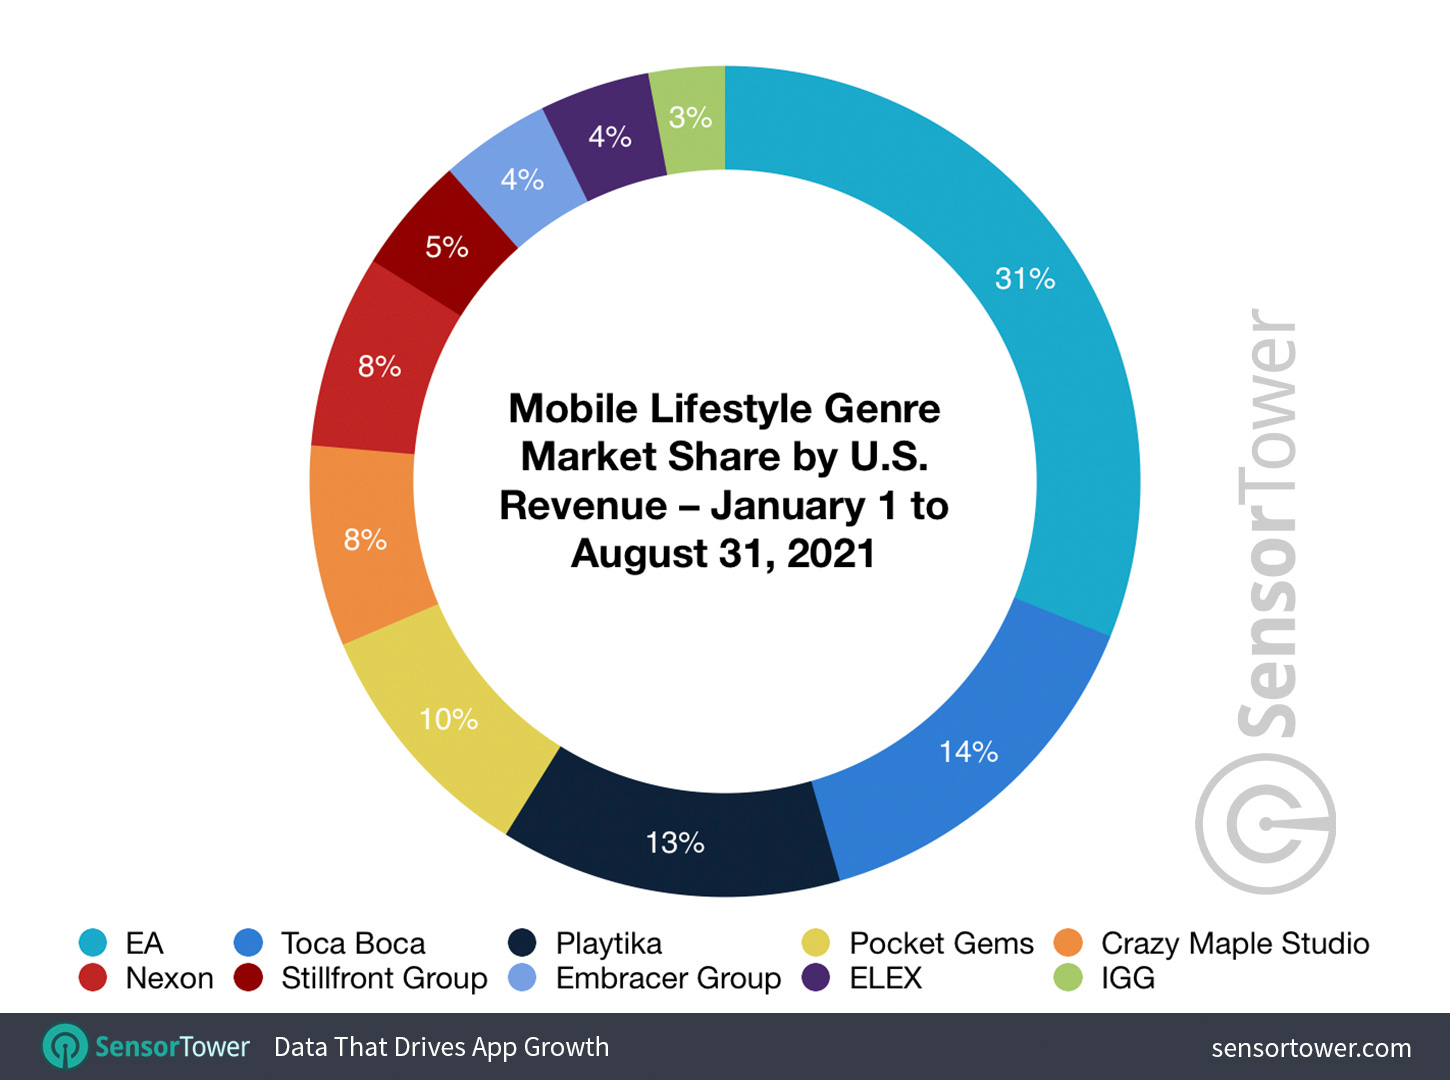 Mobile Lifestyle Genre Market Share by U.S. Revenue – January 1 to August 31, 2021